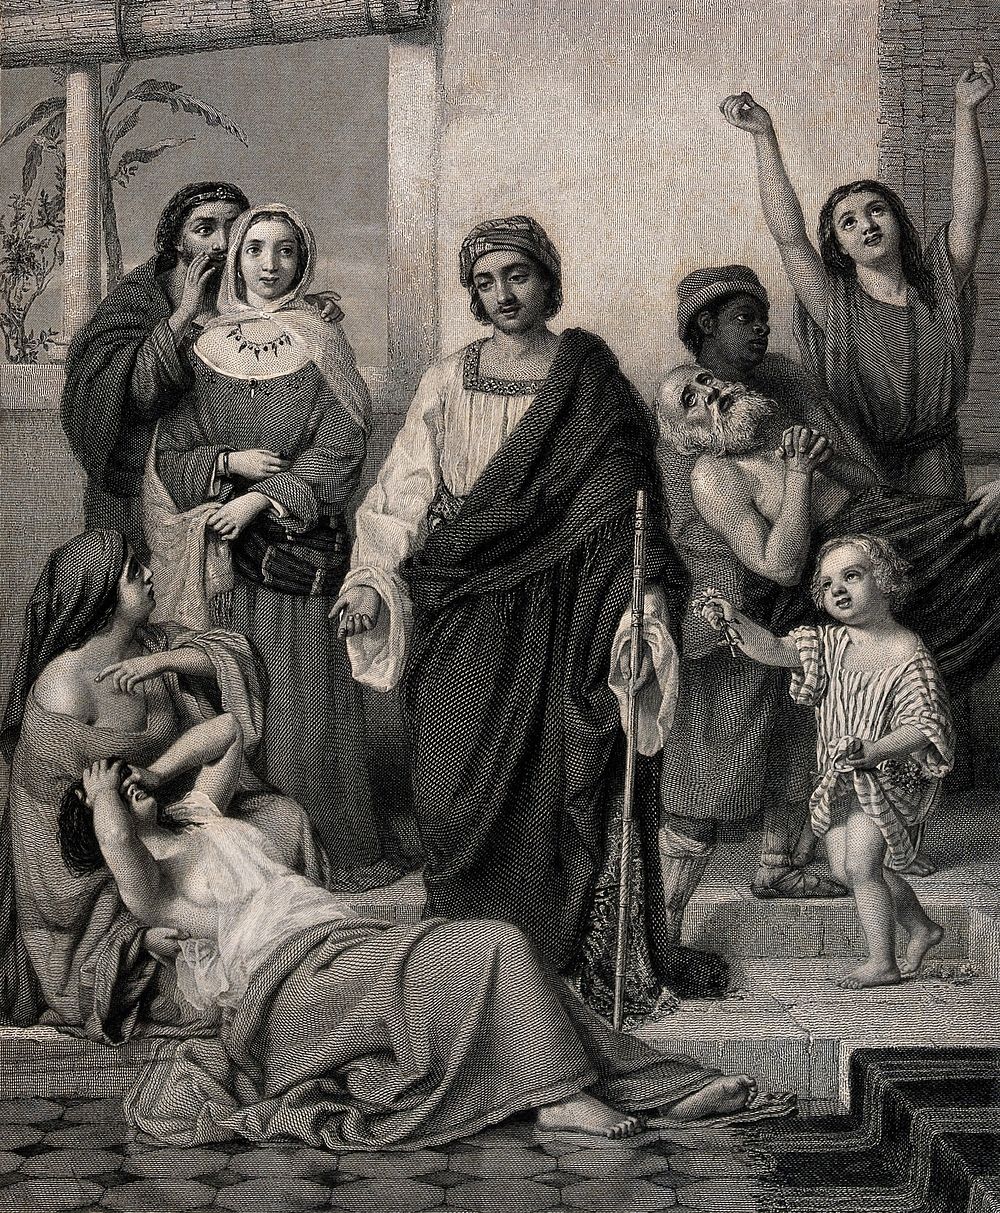 Job giving alms to the sick. Engraving by H. Bourne, 1862, after W.C.T. Dobson.